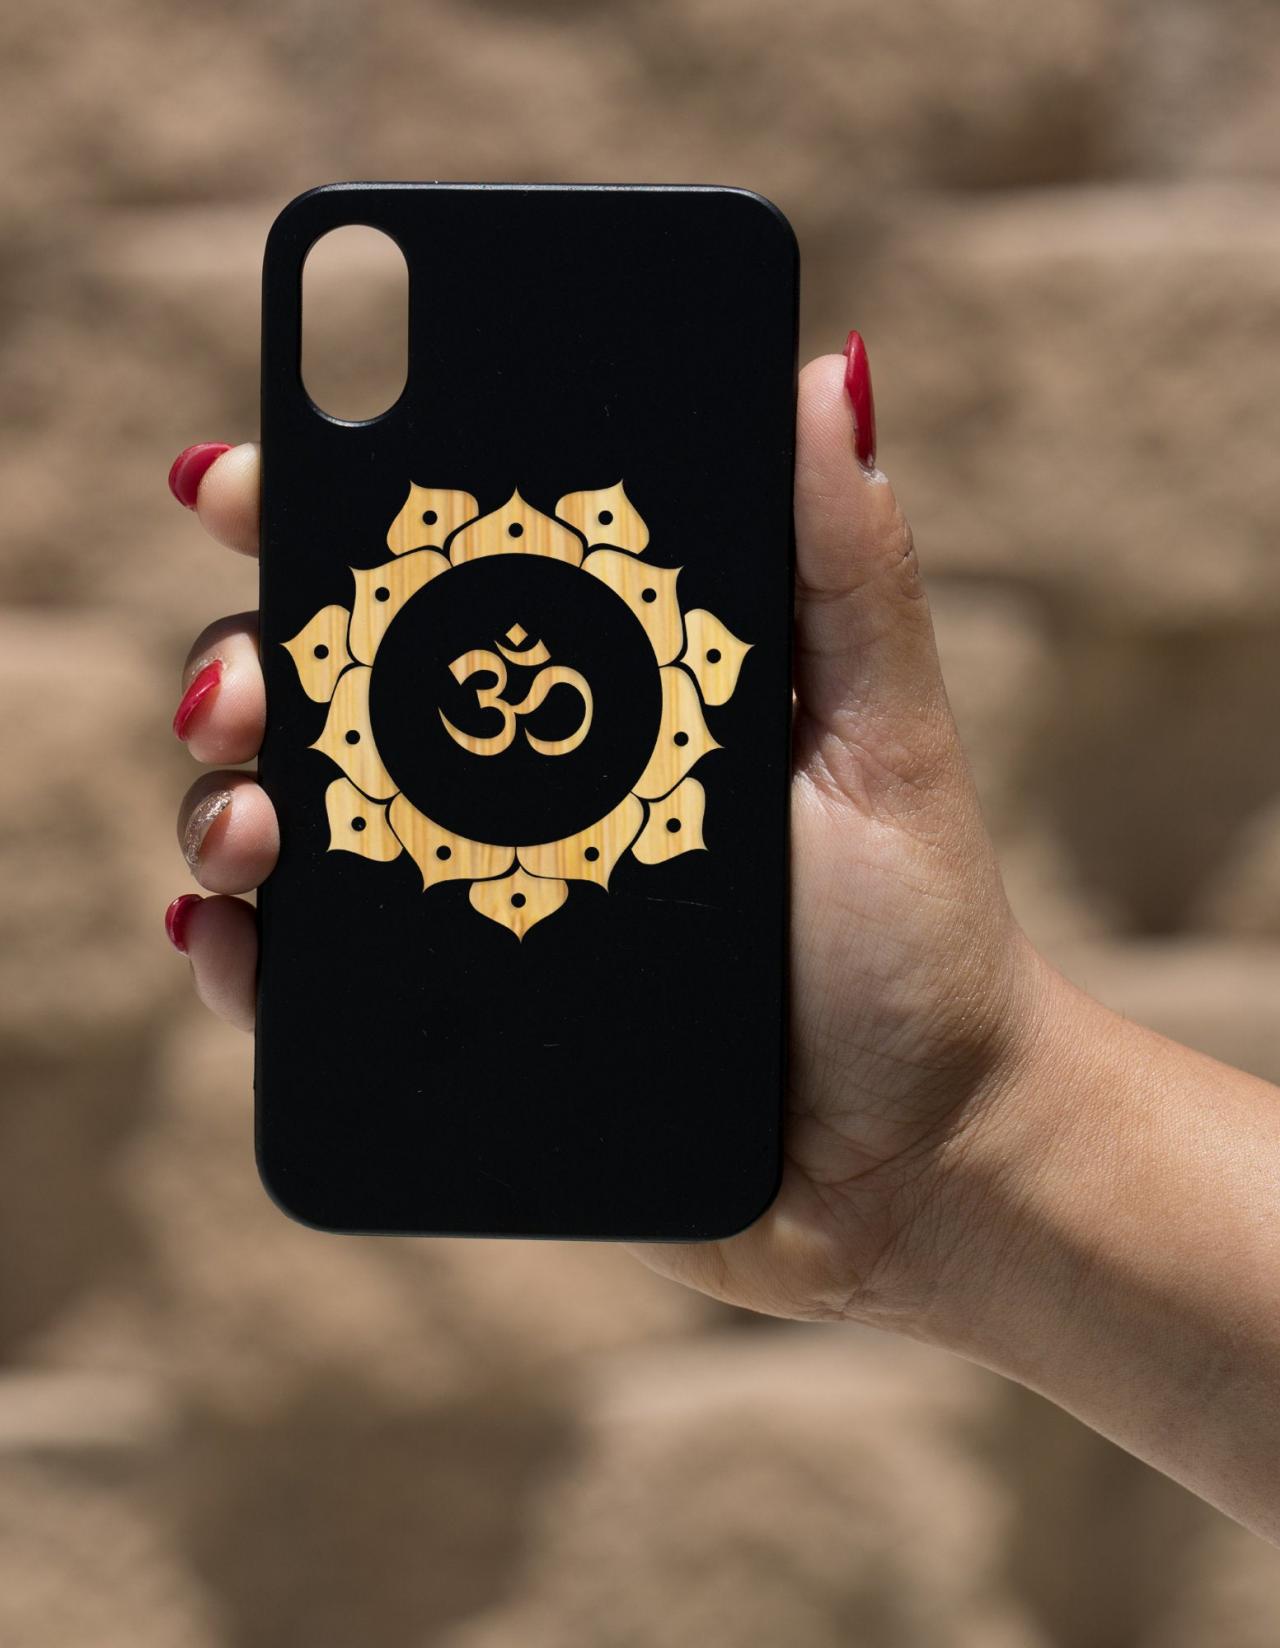 OM IPhone X Case, Engraved Iphone X case, Wooden Engraved Iphone X Case, Iphone case, Beautiful Gift for here,unique case,